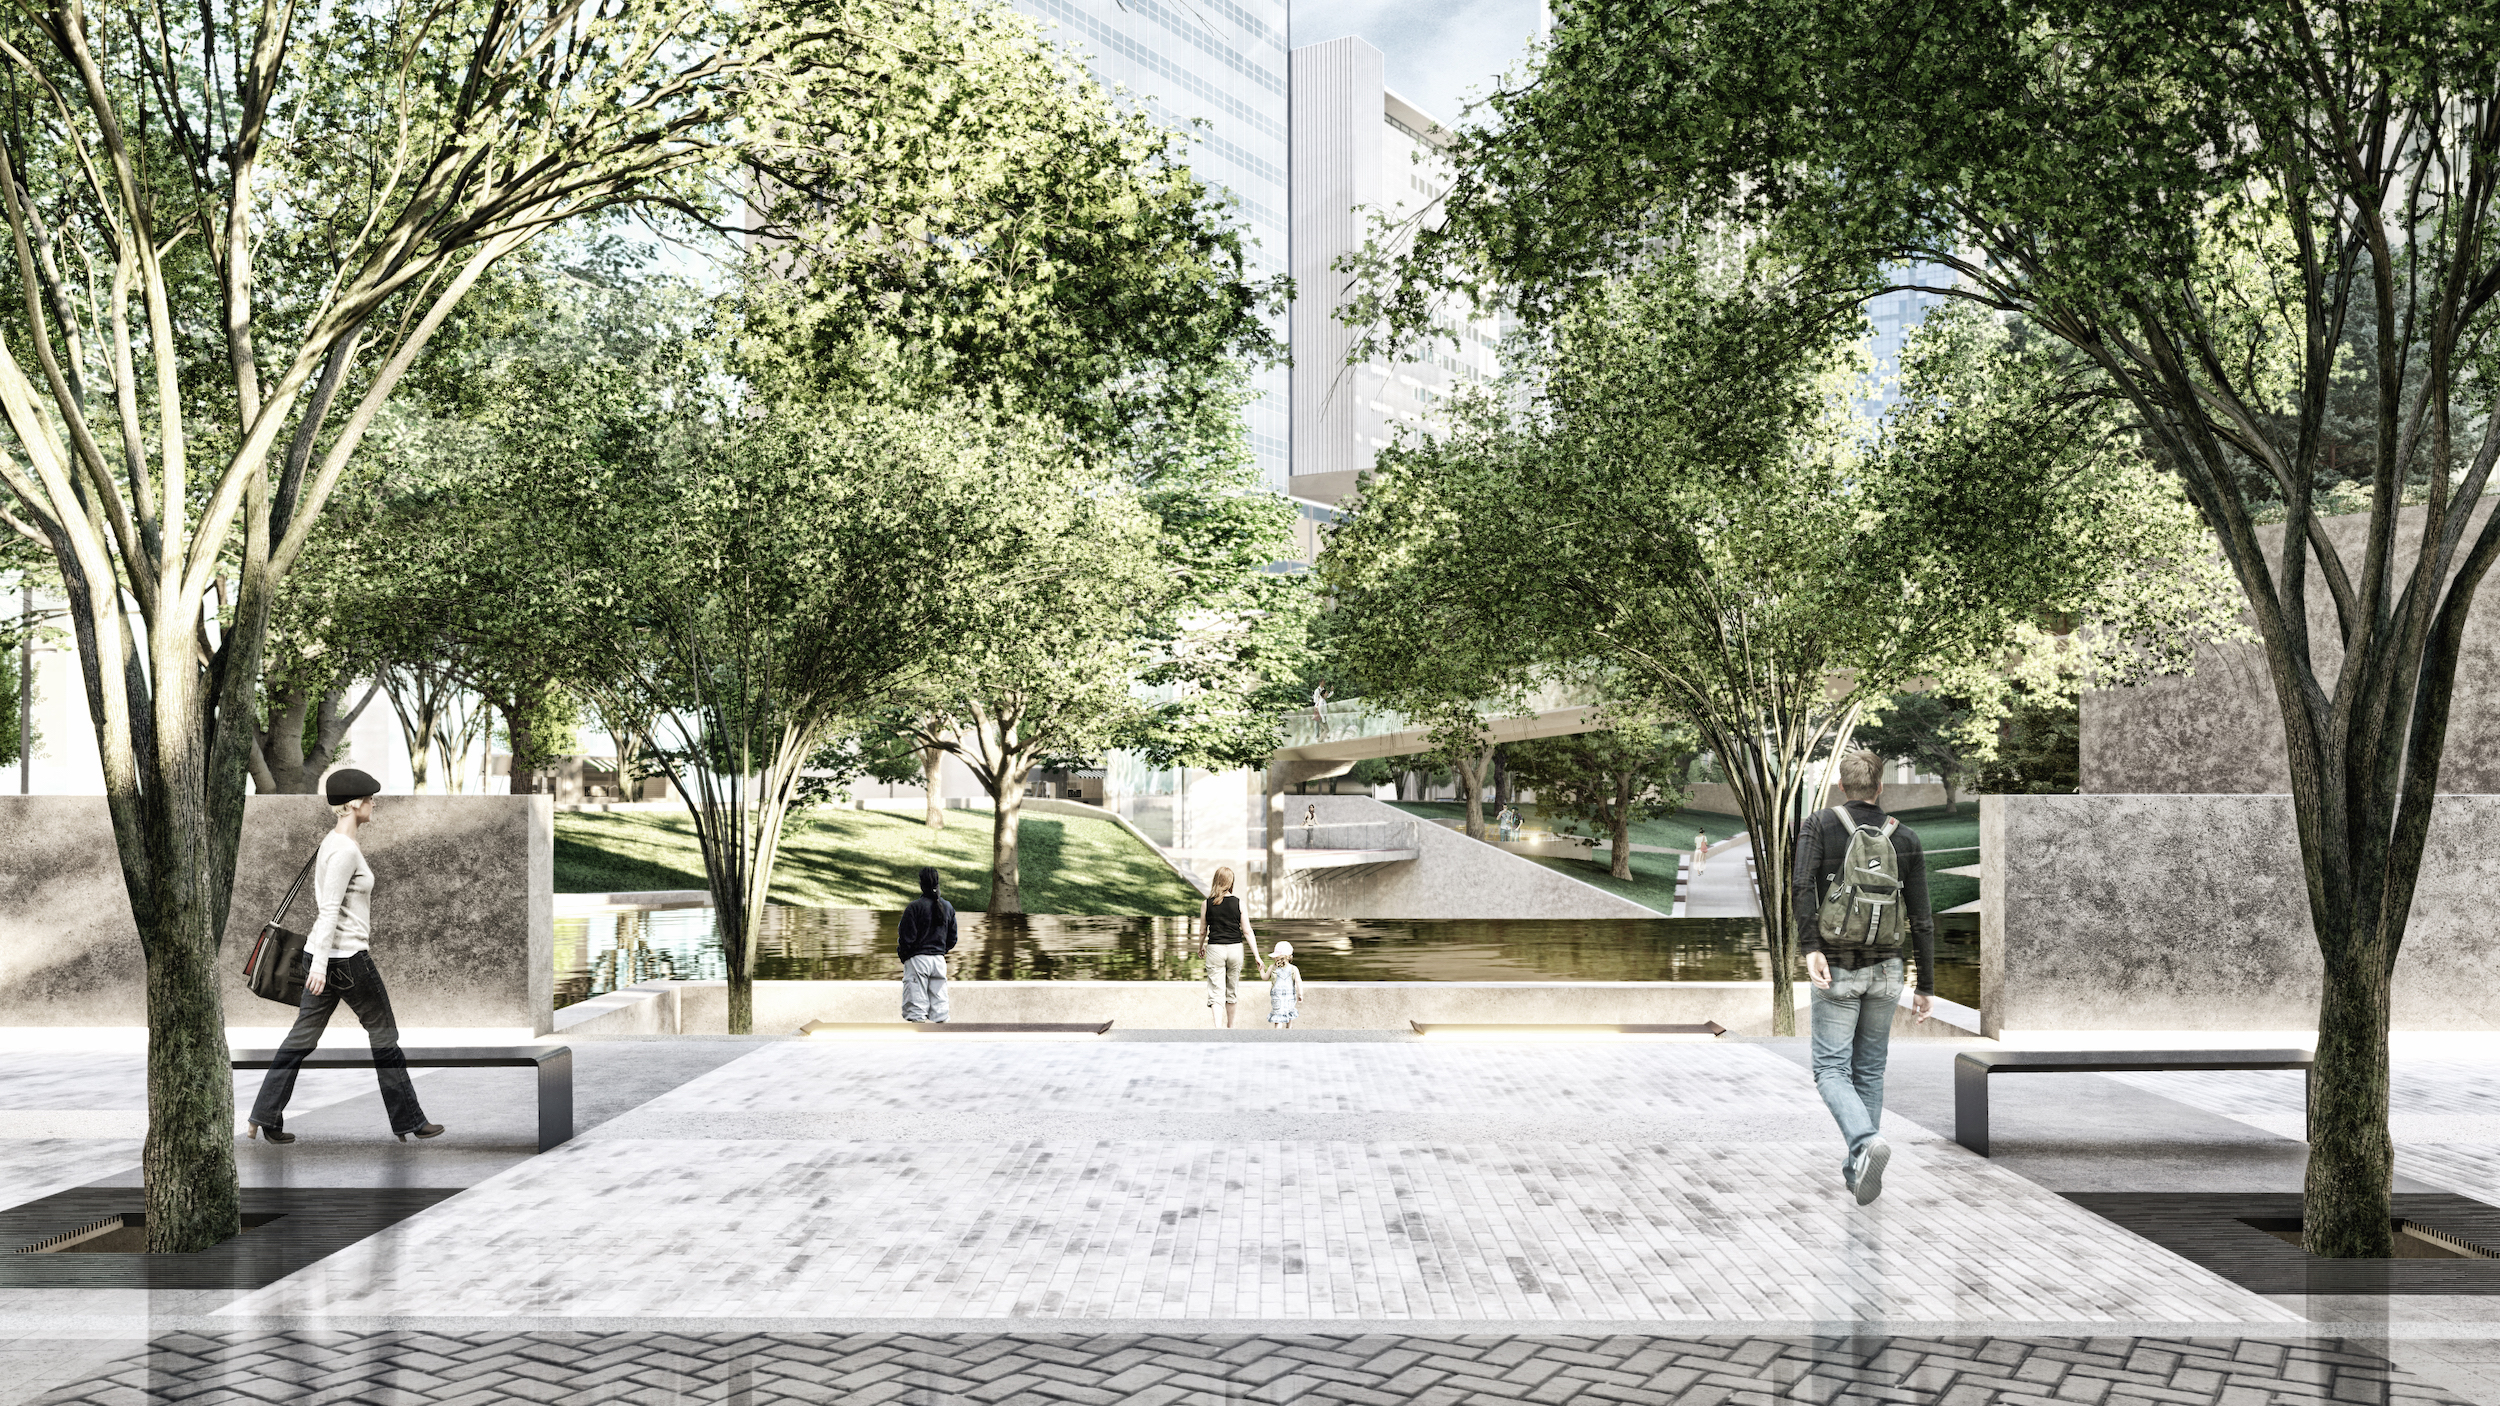 Rendering of a park with revitalized streetscape